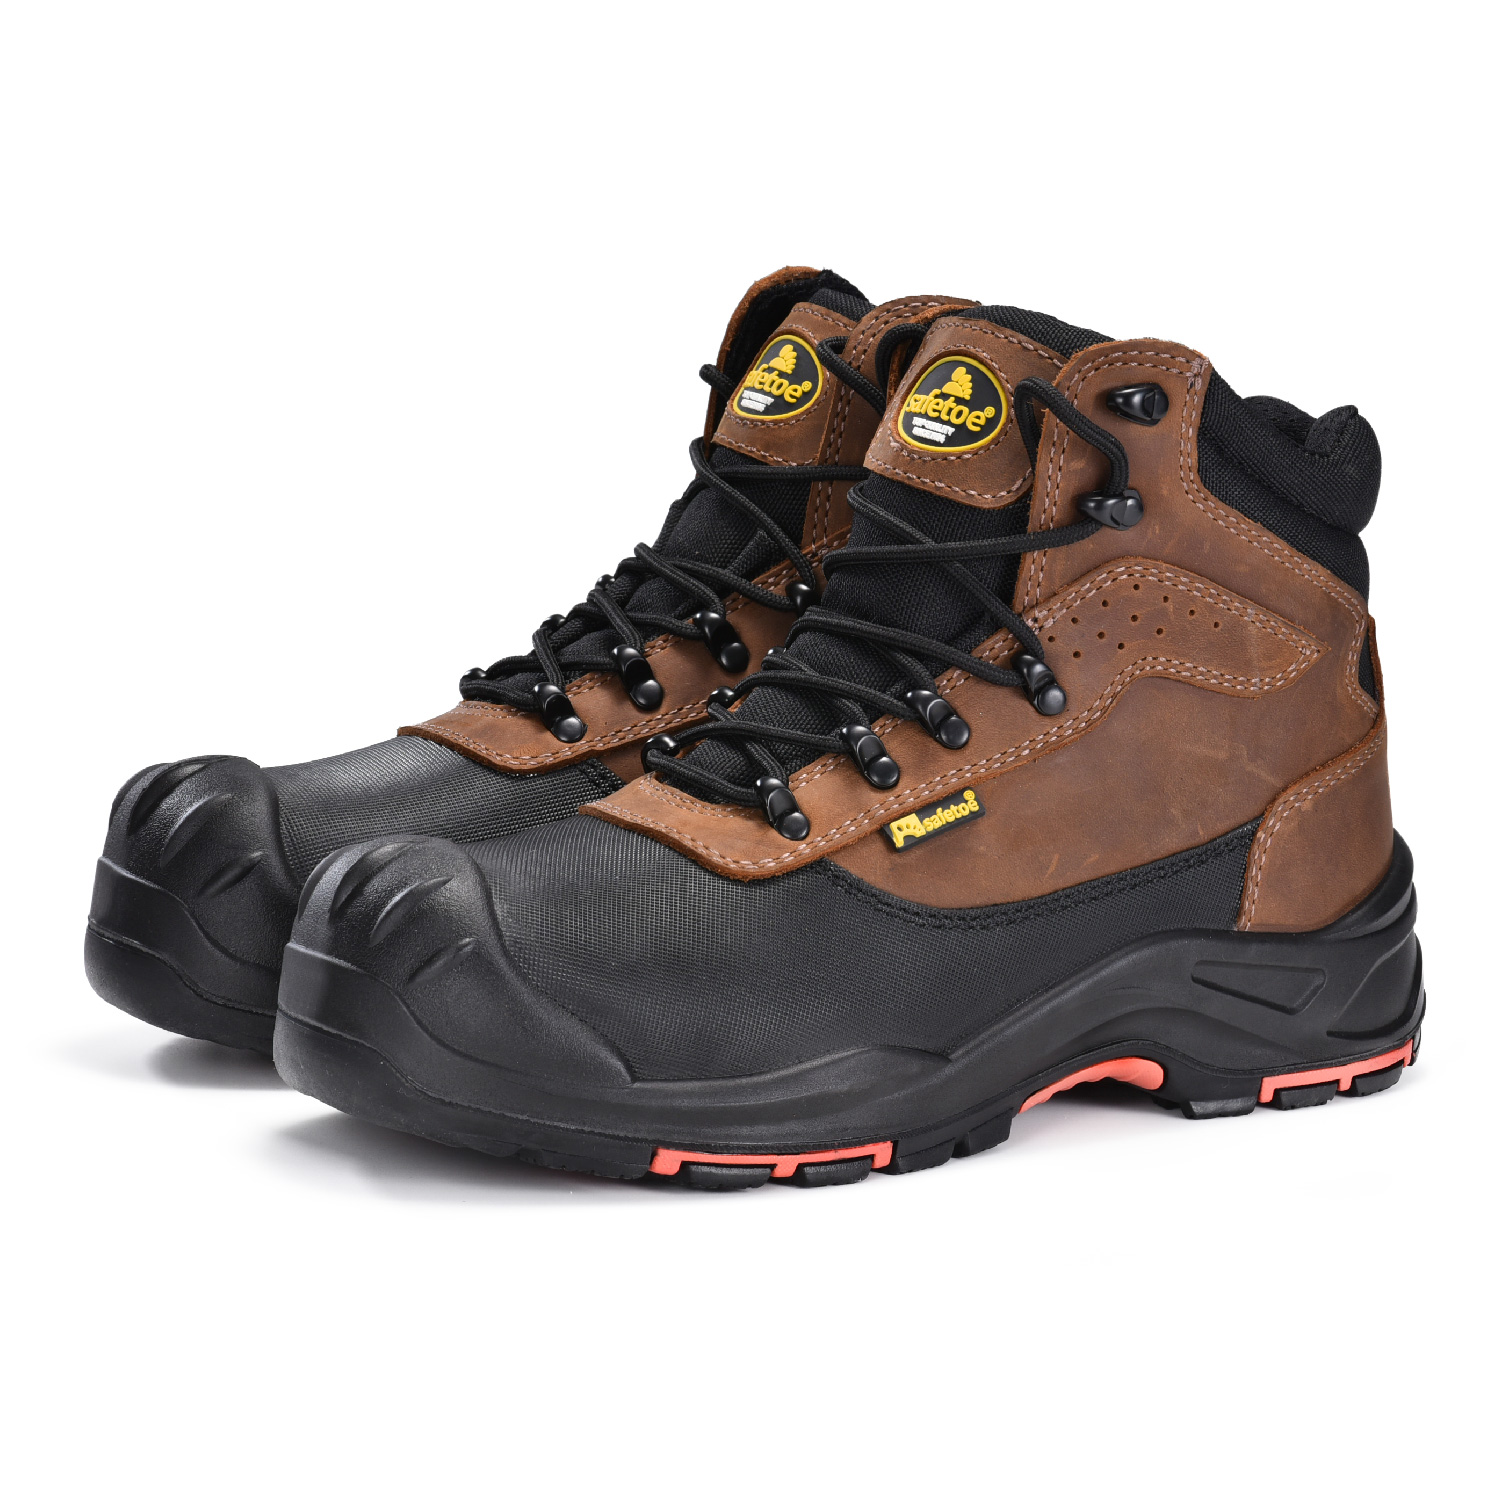 Nubuck Leather Slip Resistant Most Comfortable Work Boots With Composite Toe for Men M-8562